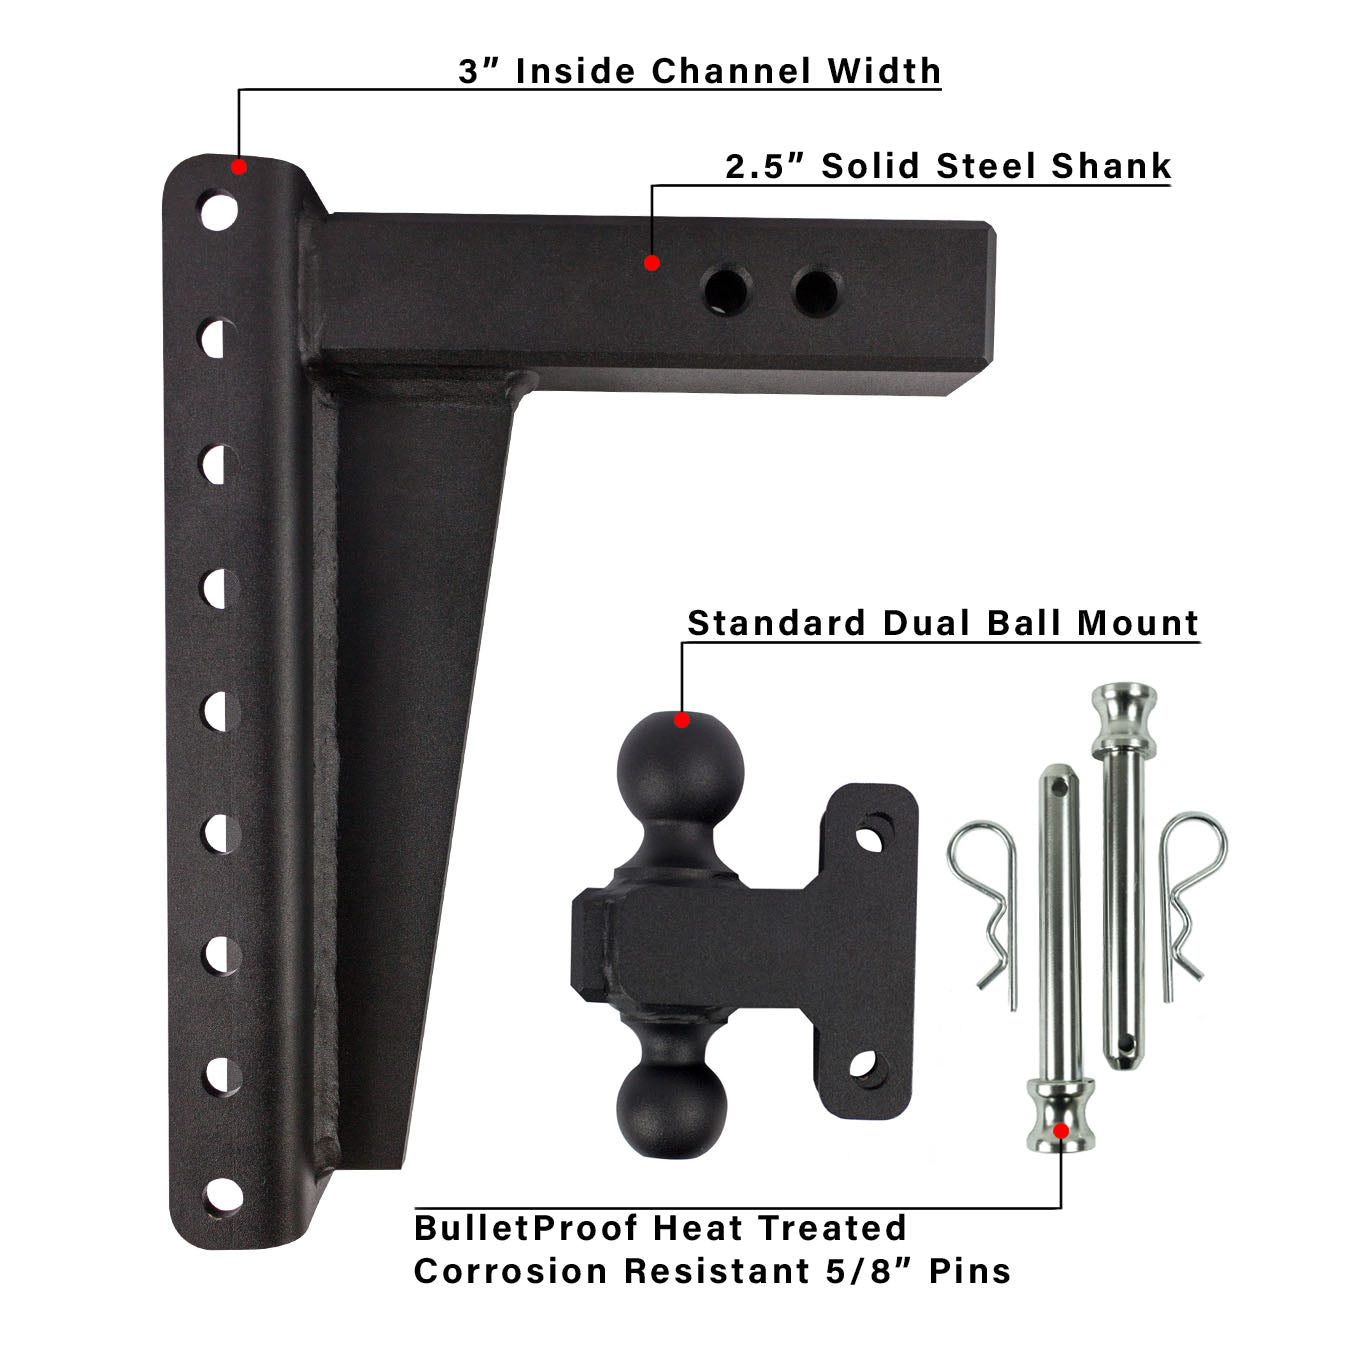 2.5" Heavy Duty 12" Drop/Rise Hitch Included Parts